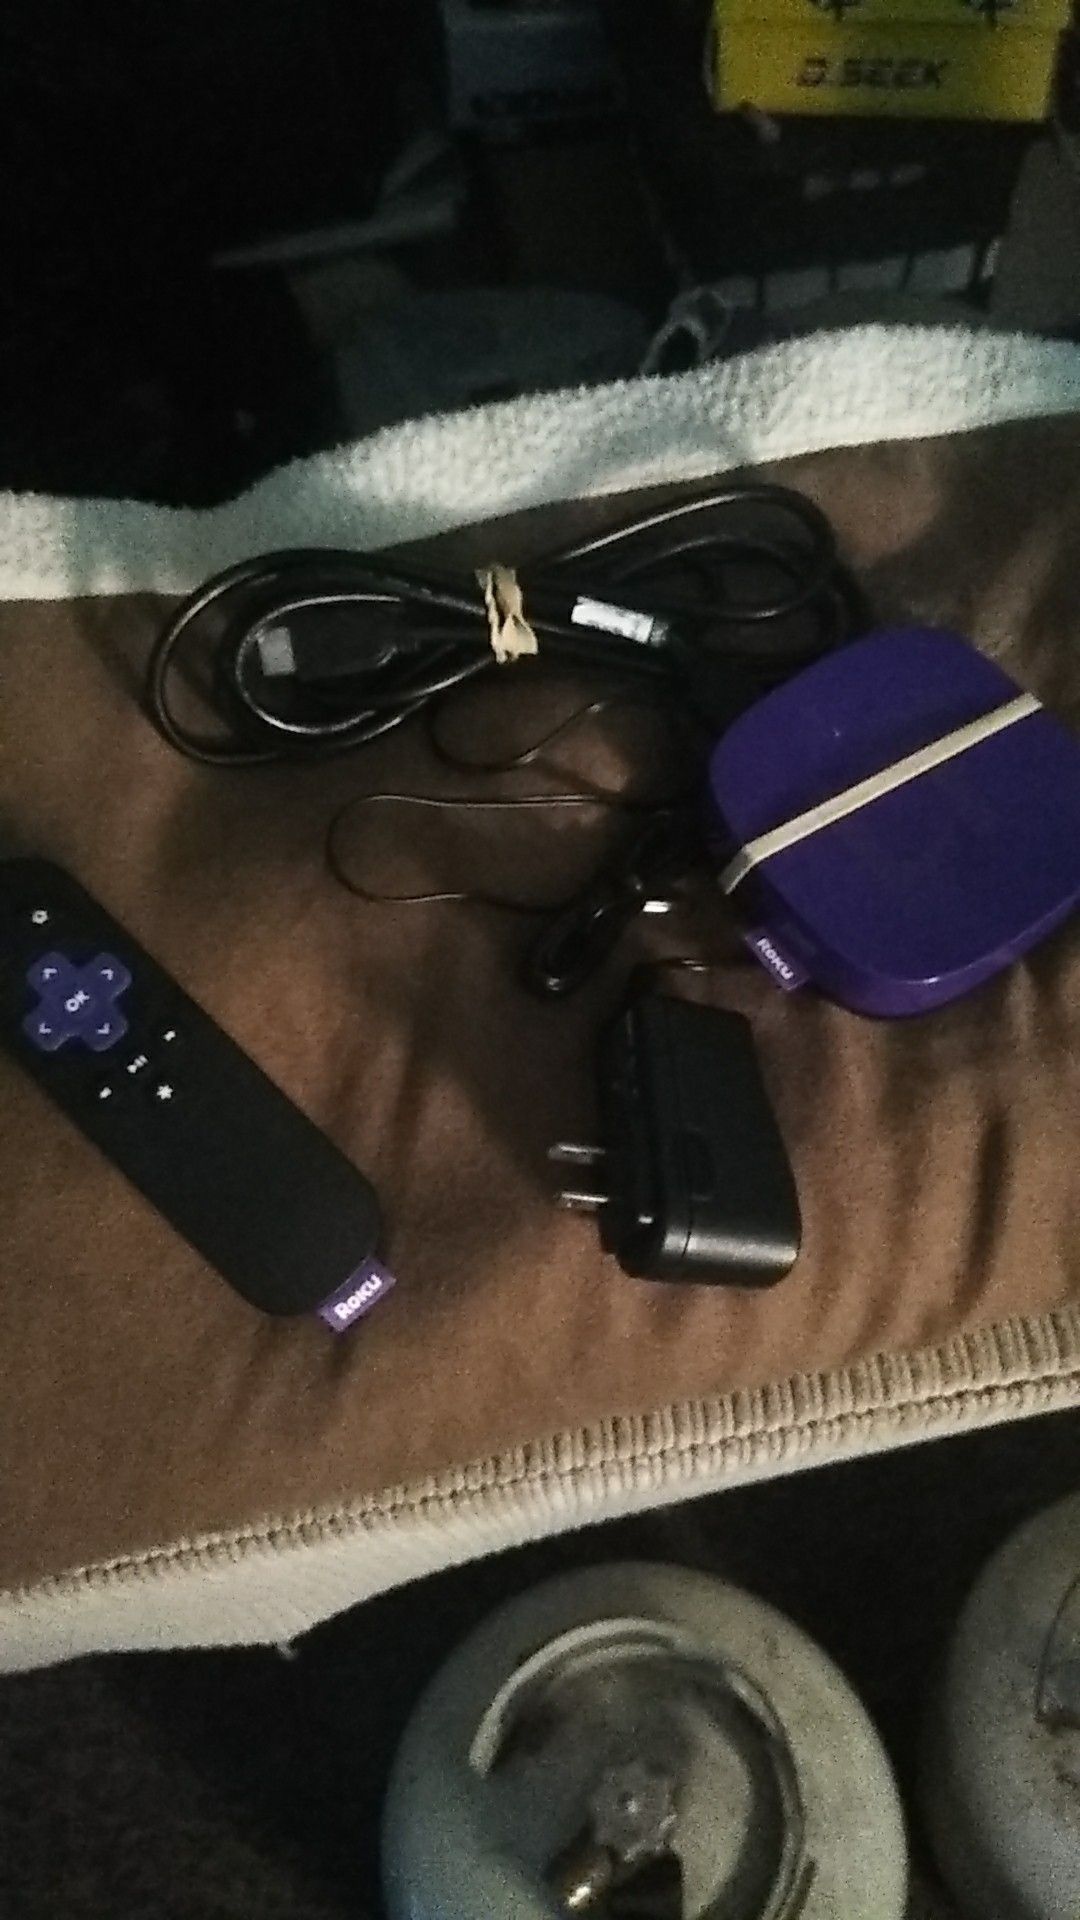 Roku with remote and cords